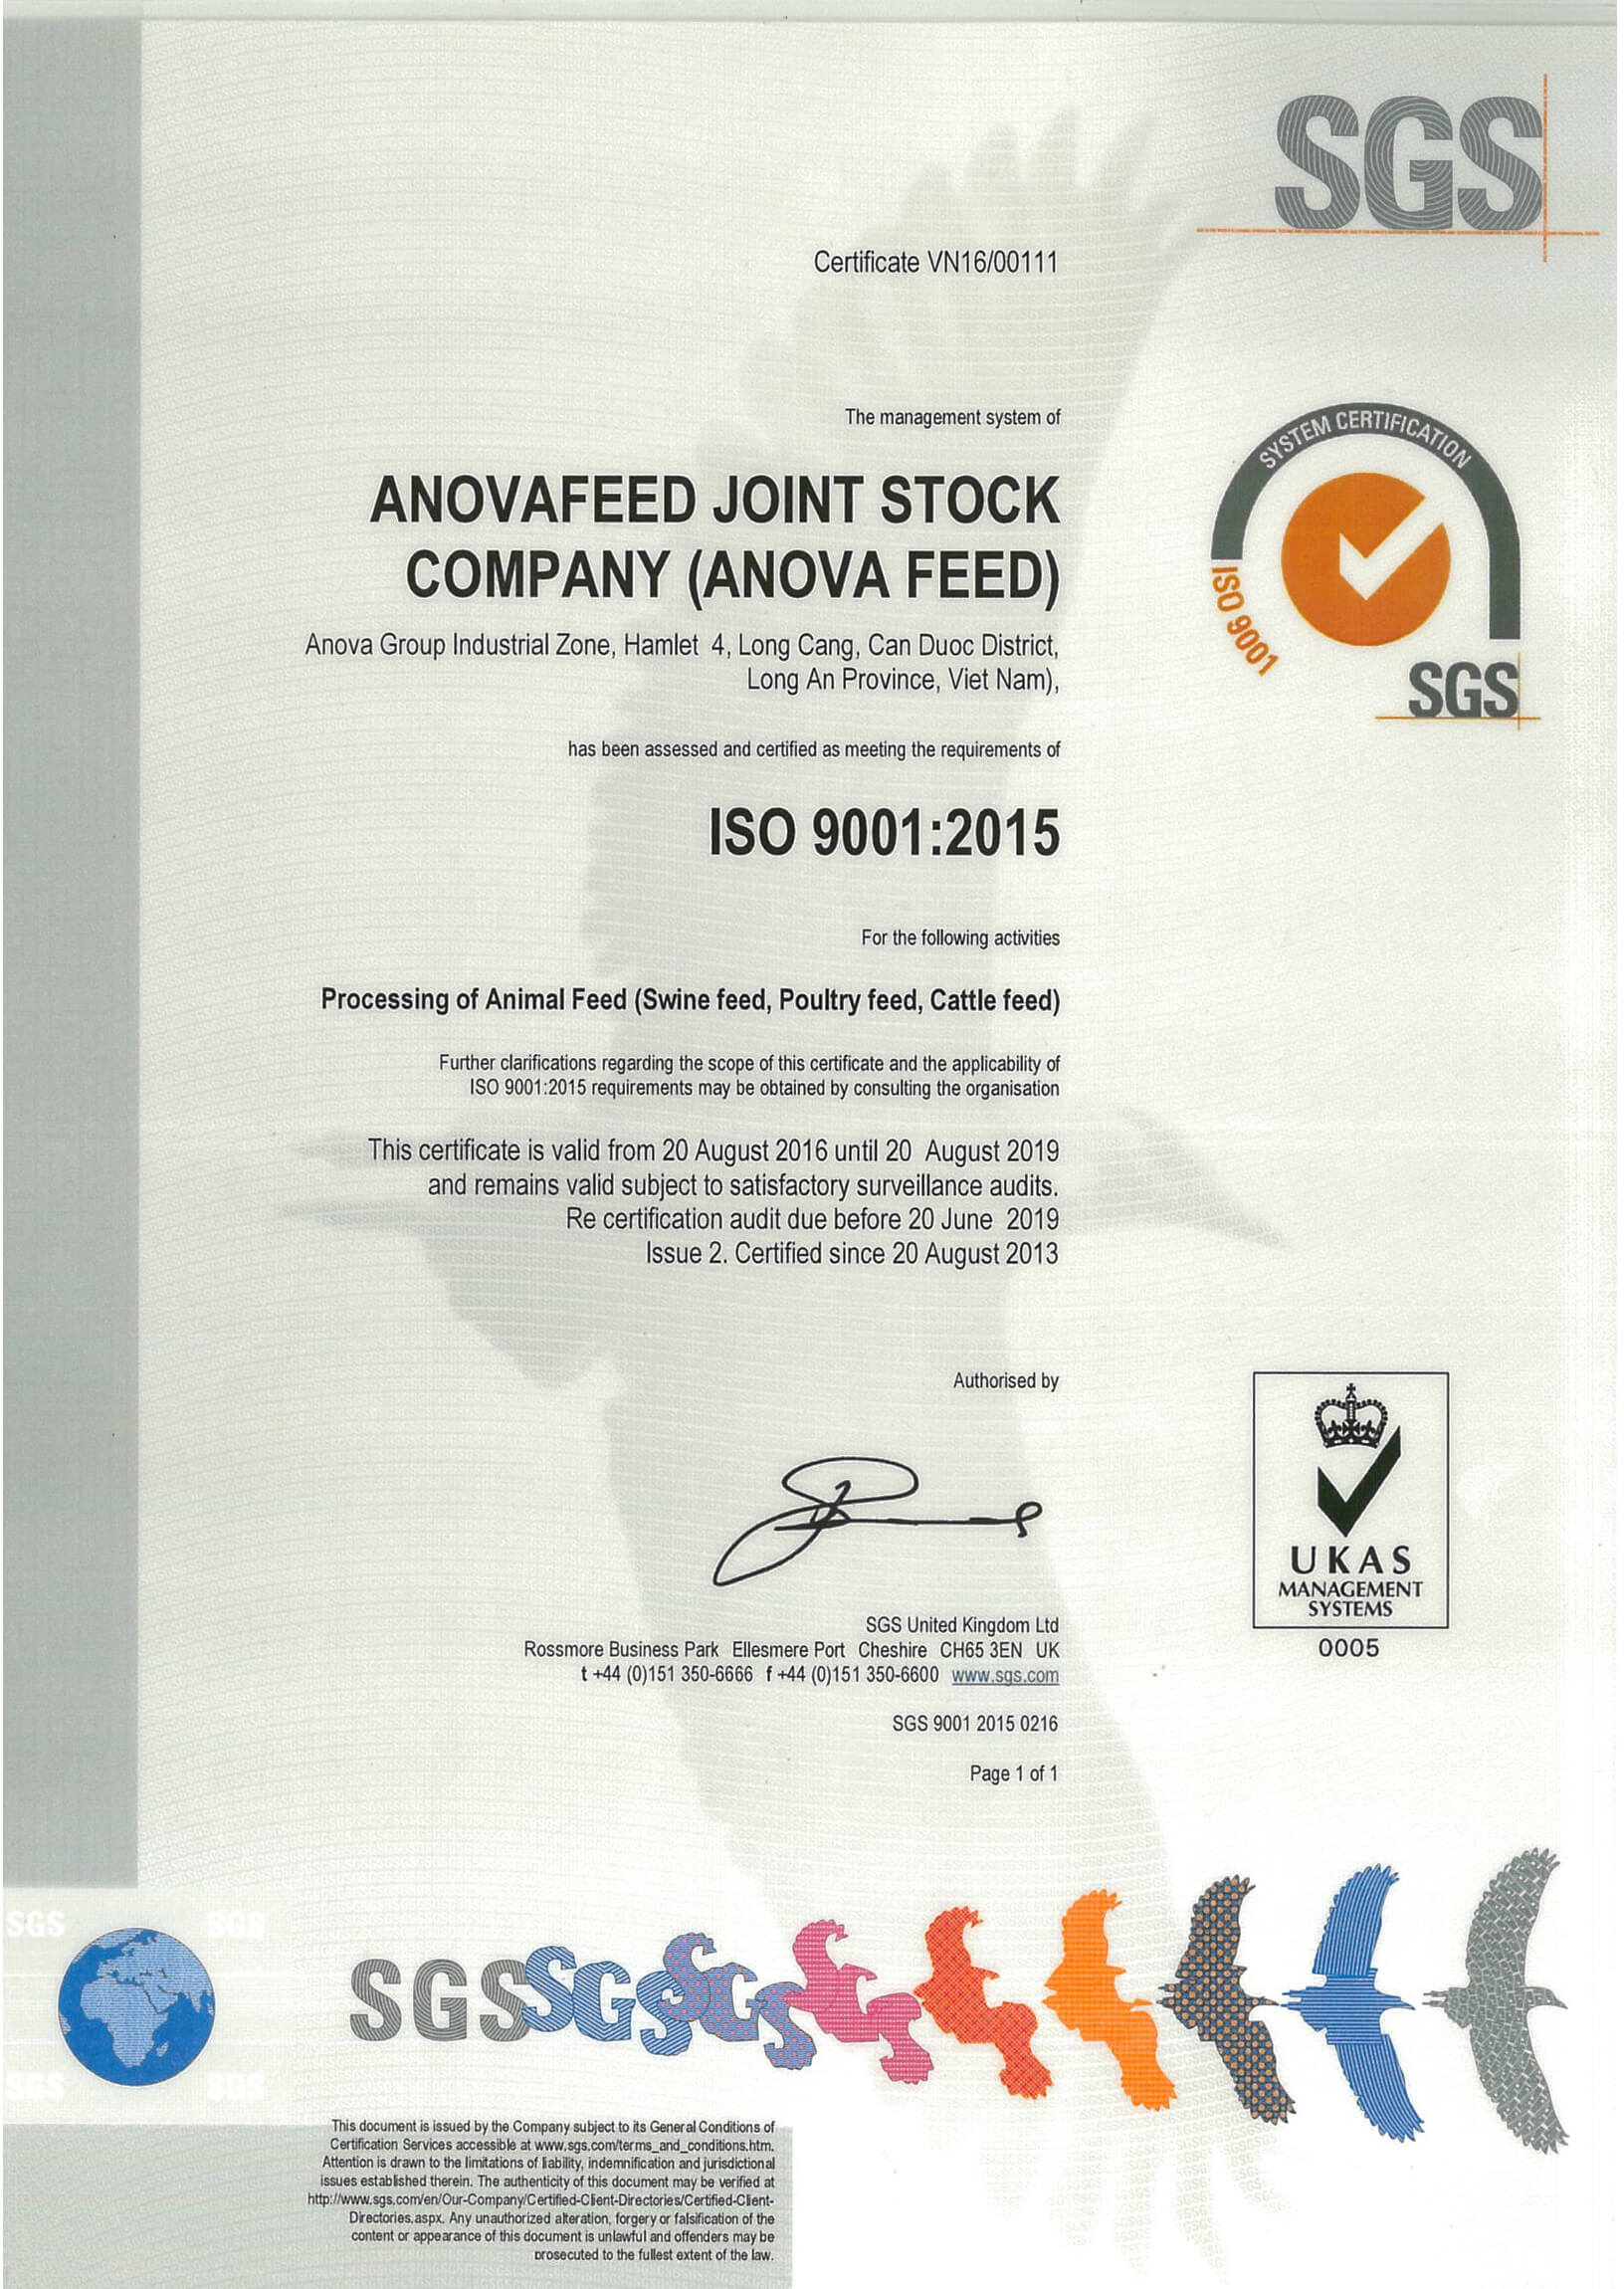 Certificate of quality management system ISO 9001: 2015